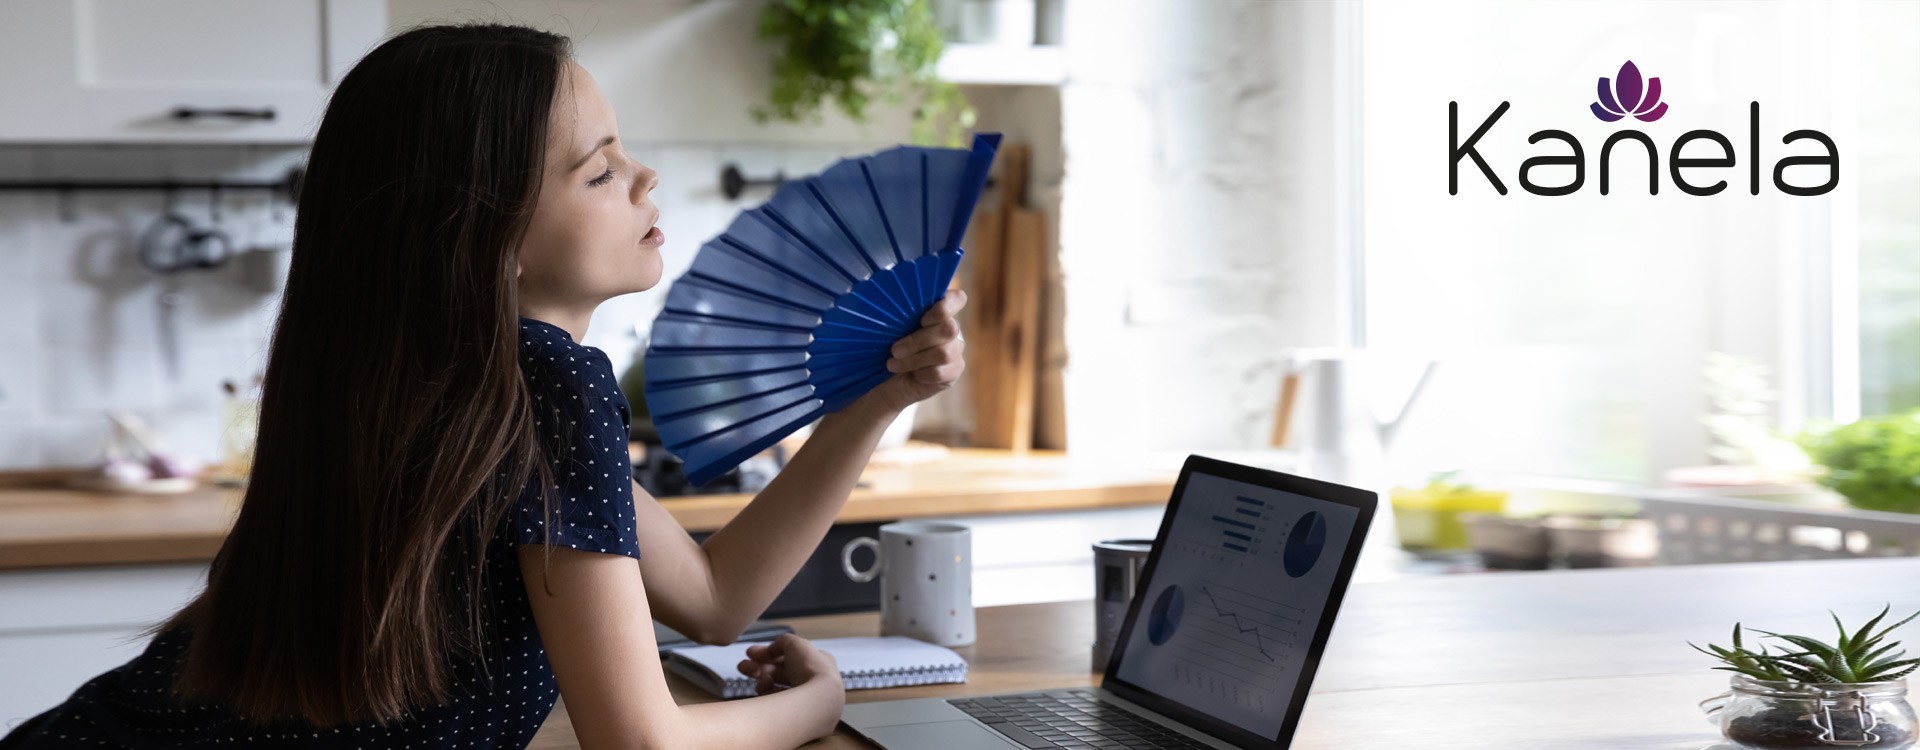 Heat in the home office: How to remedy it